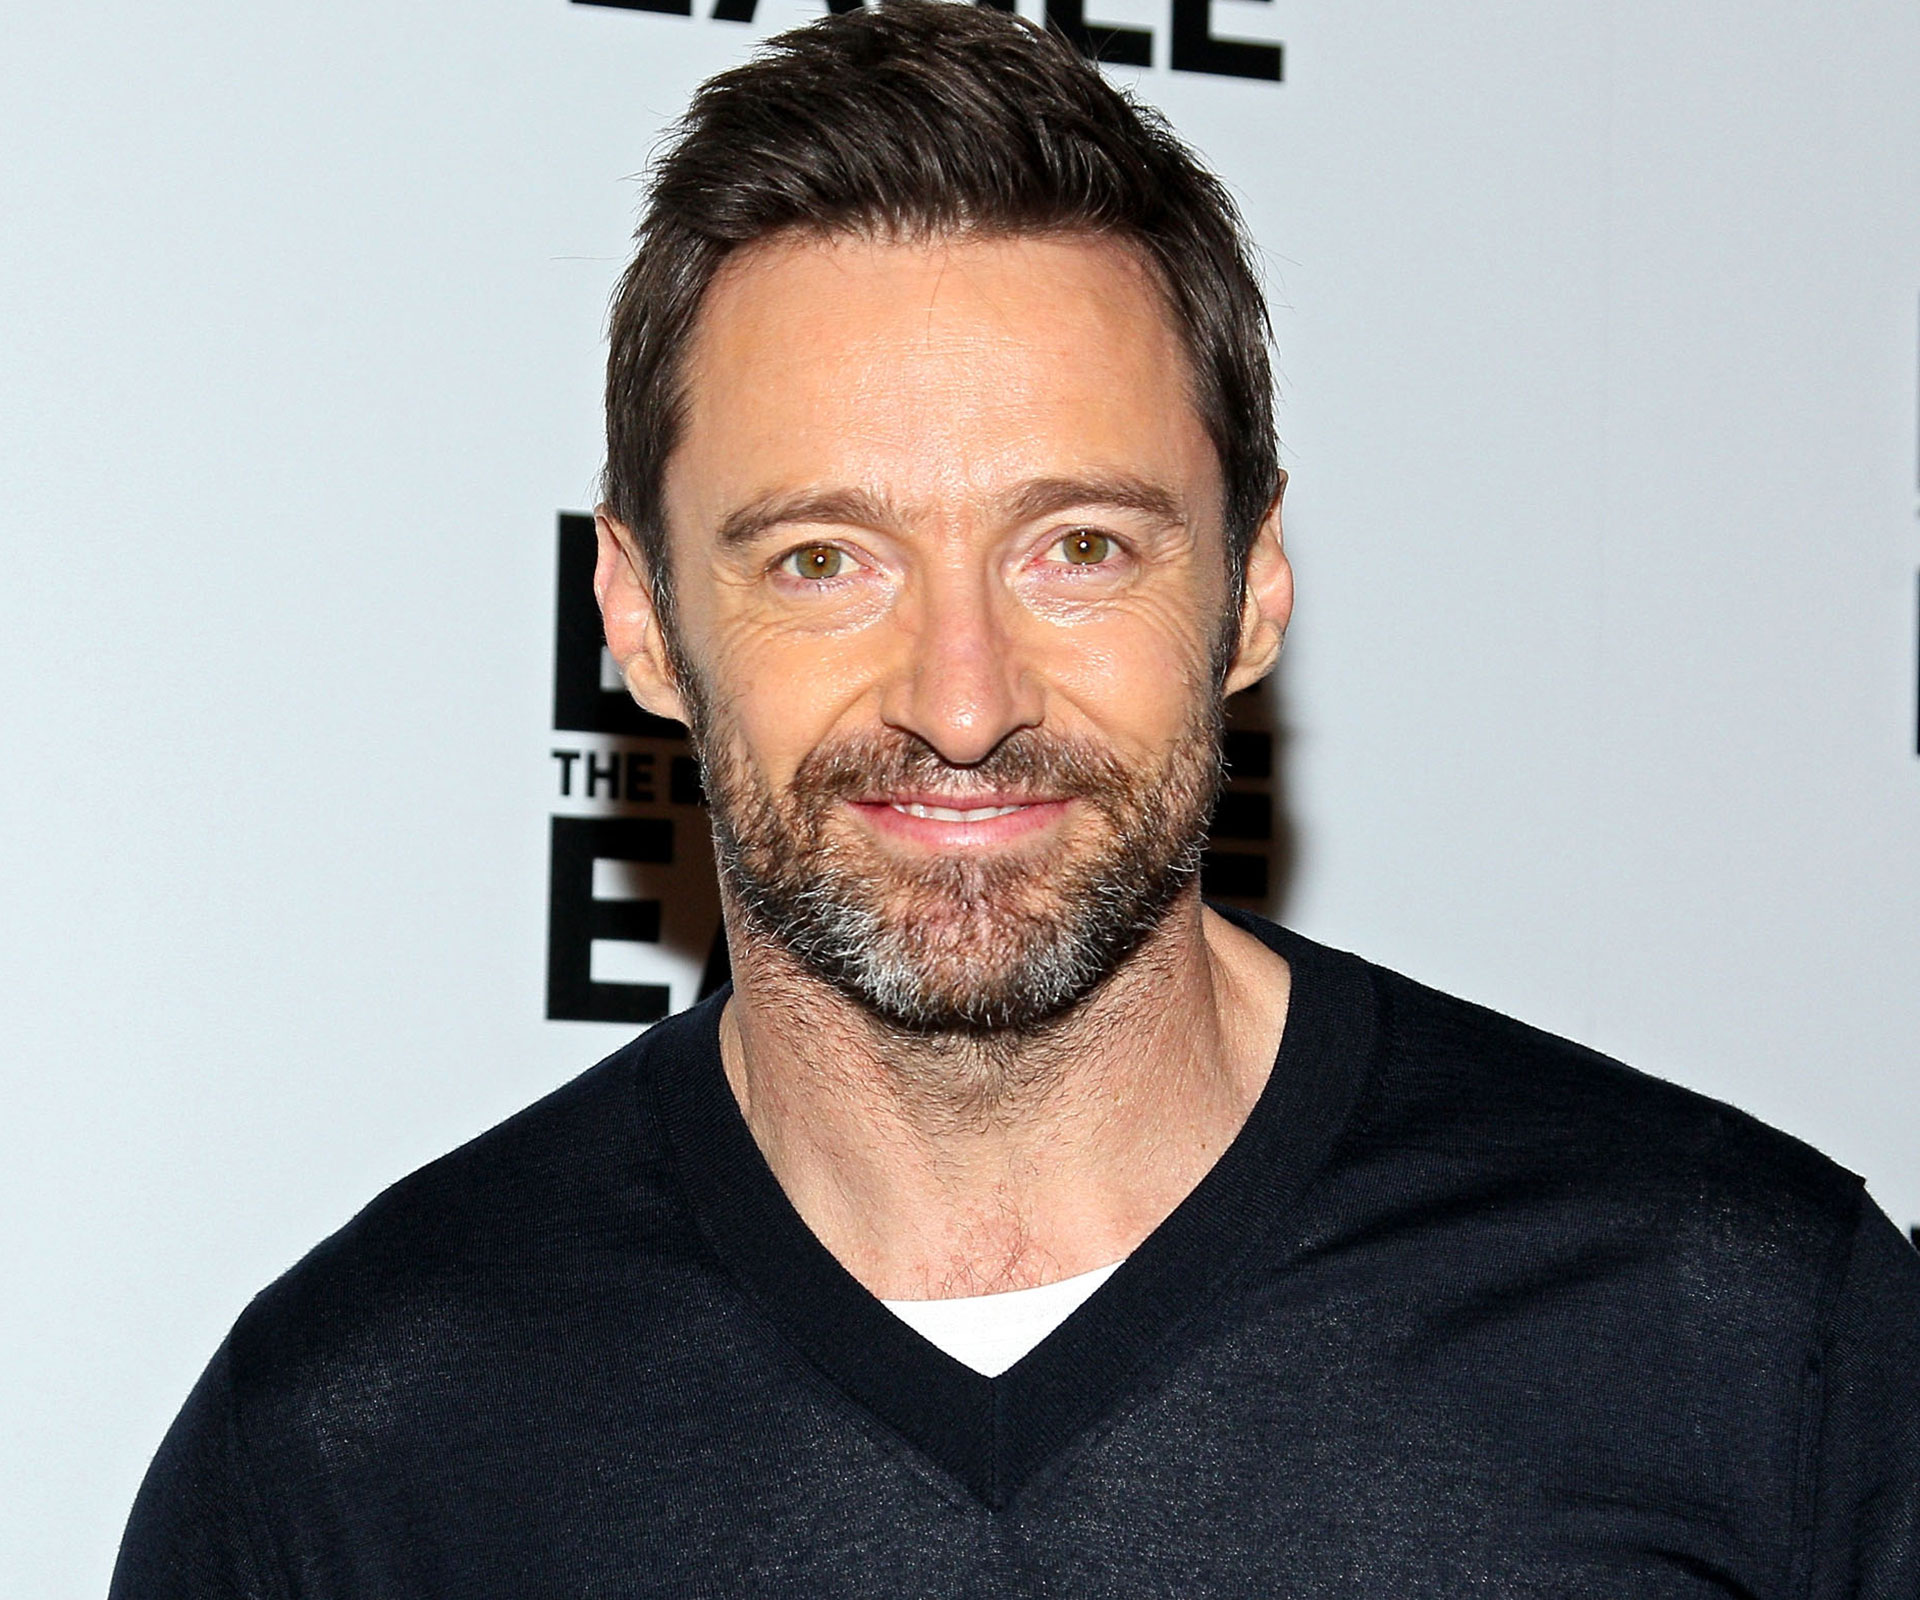 Hugh Jackman diagnosed with cancer again